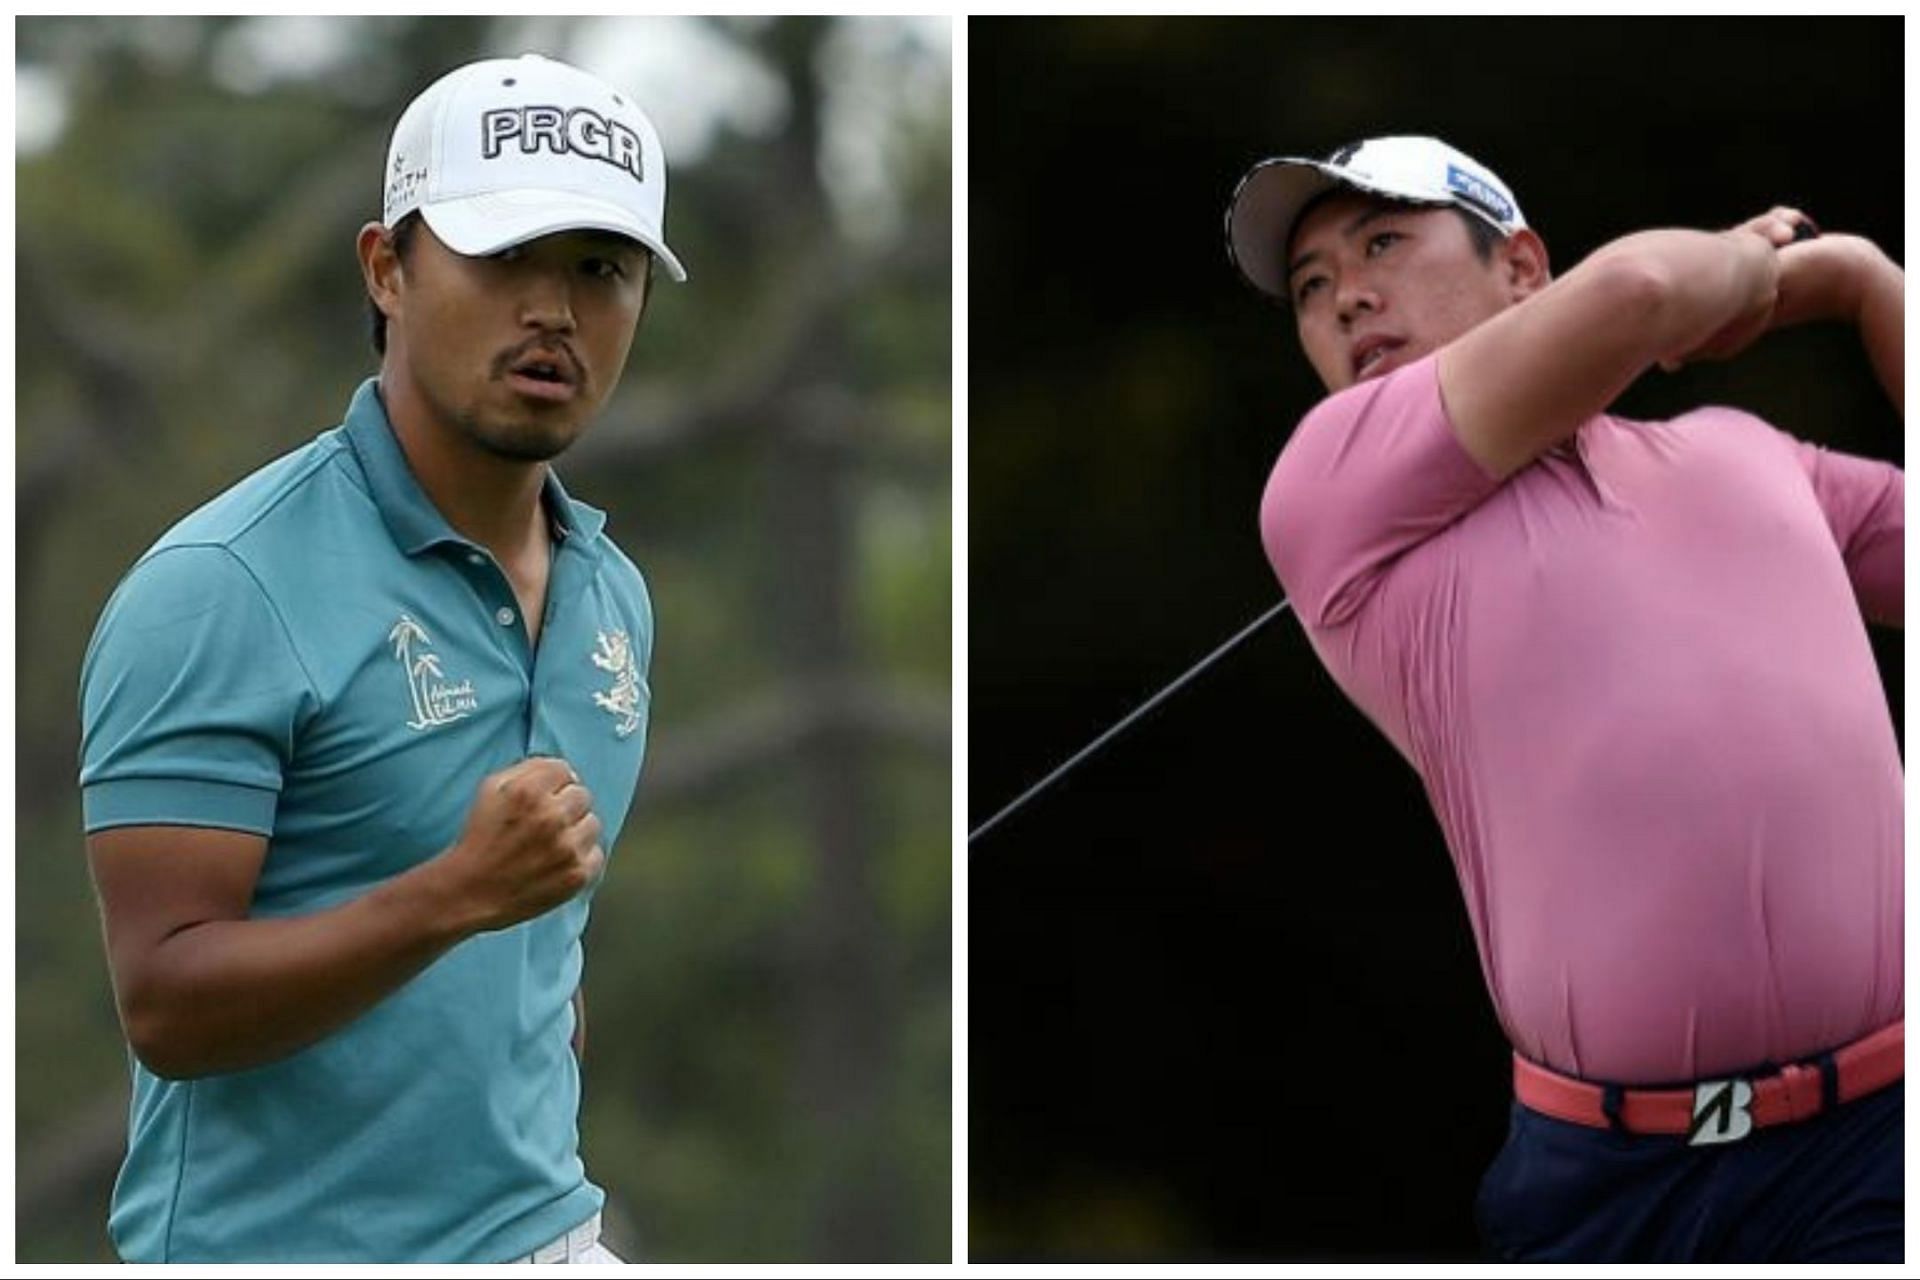 Satoshi Kodaira and Mikumu Horikawa are two of the six Japanese golfers inside the top 20 after two rounds at Zozo Championship 2023